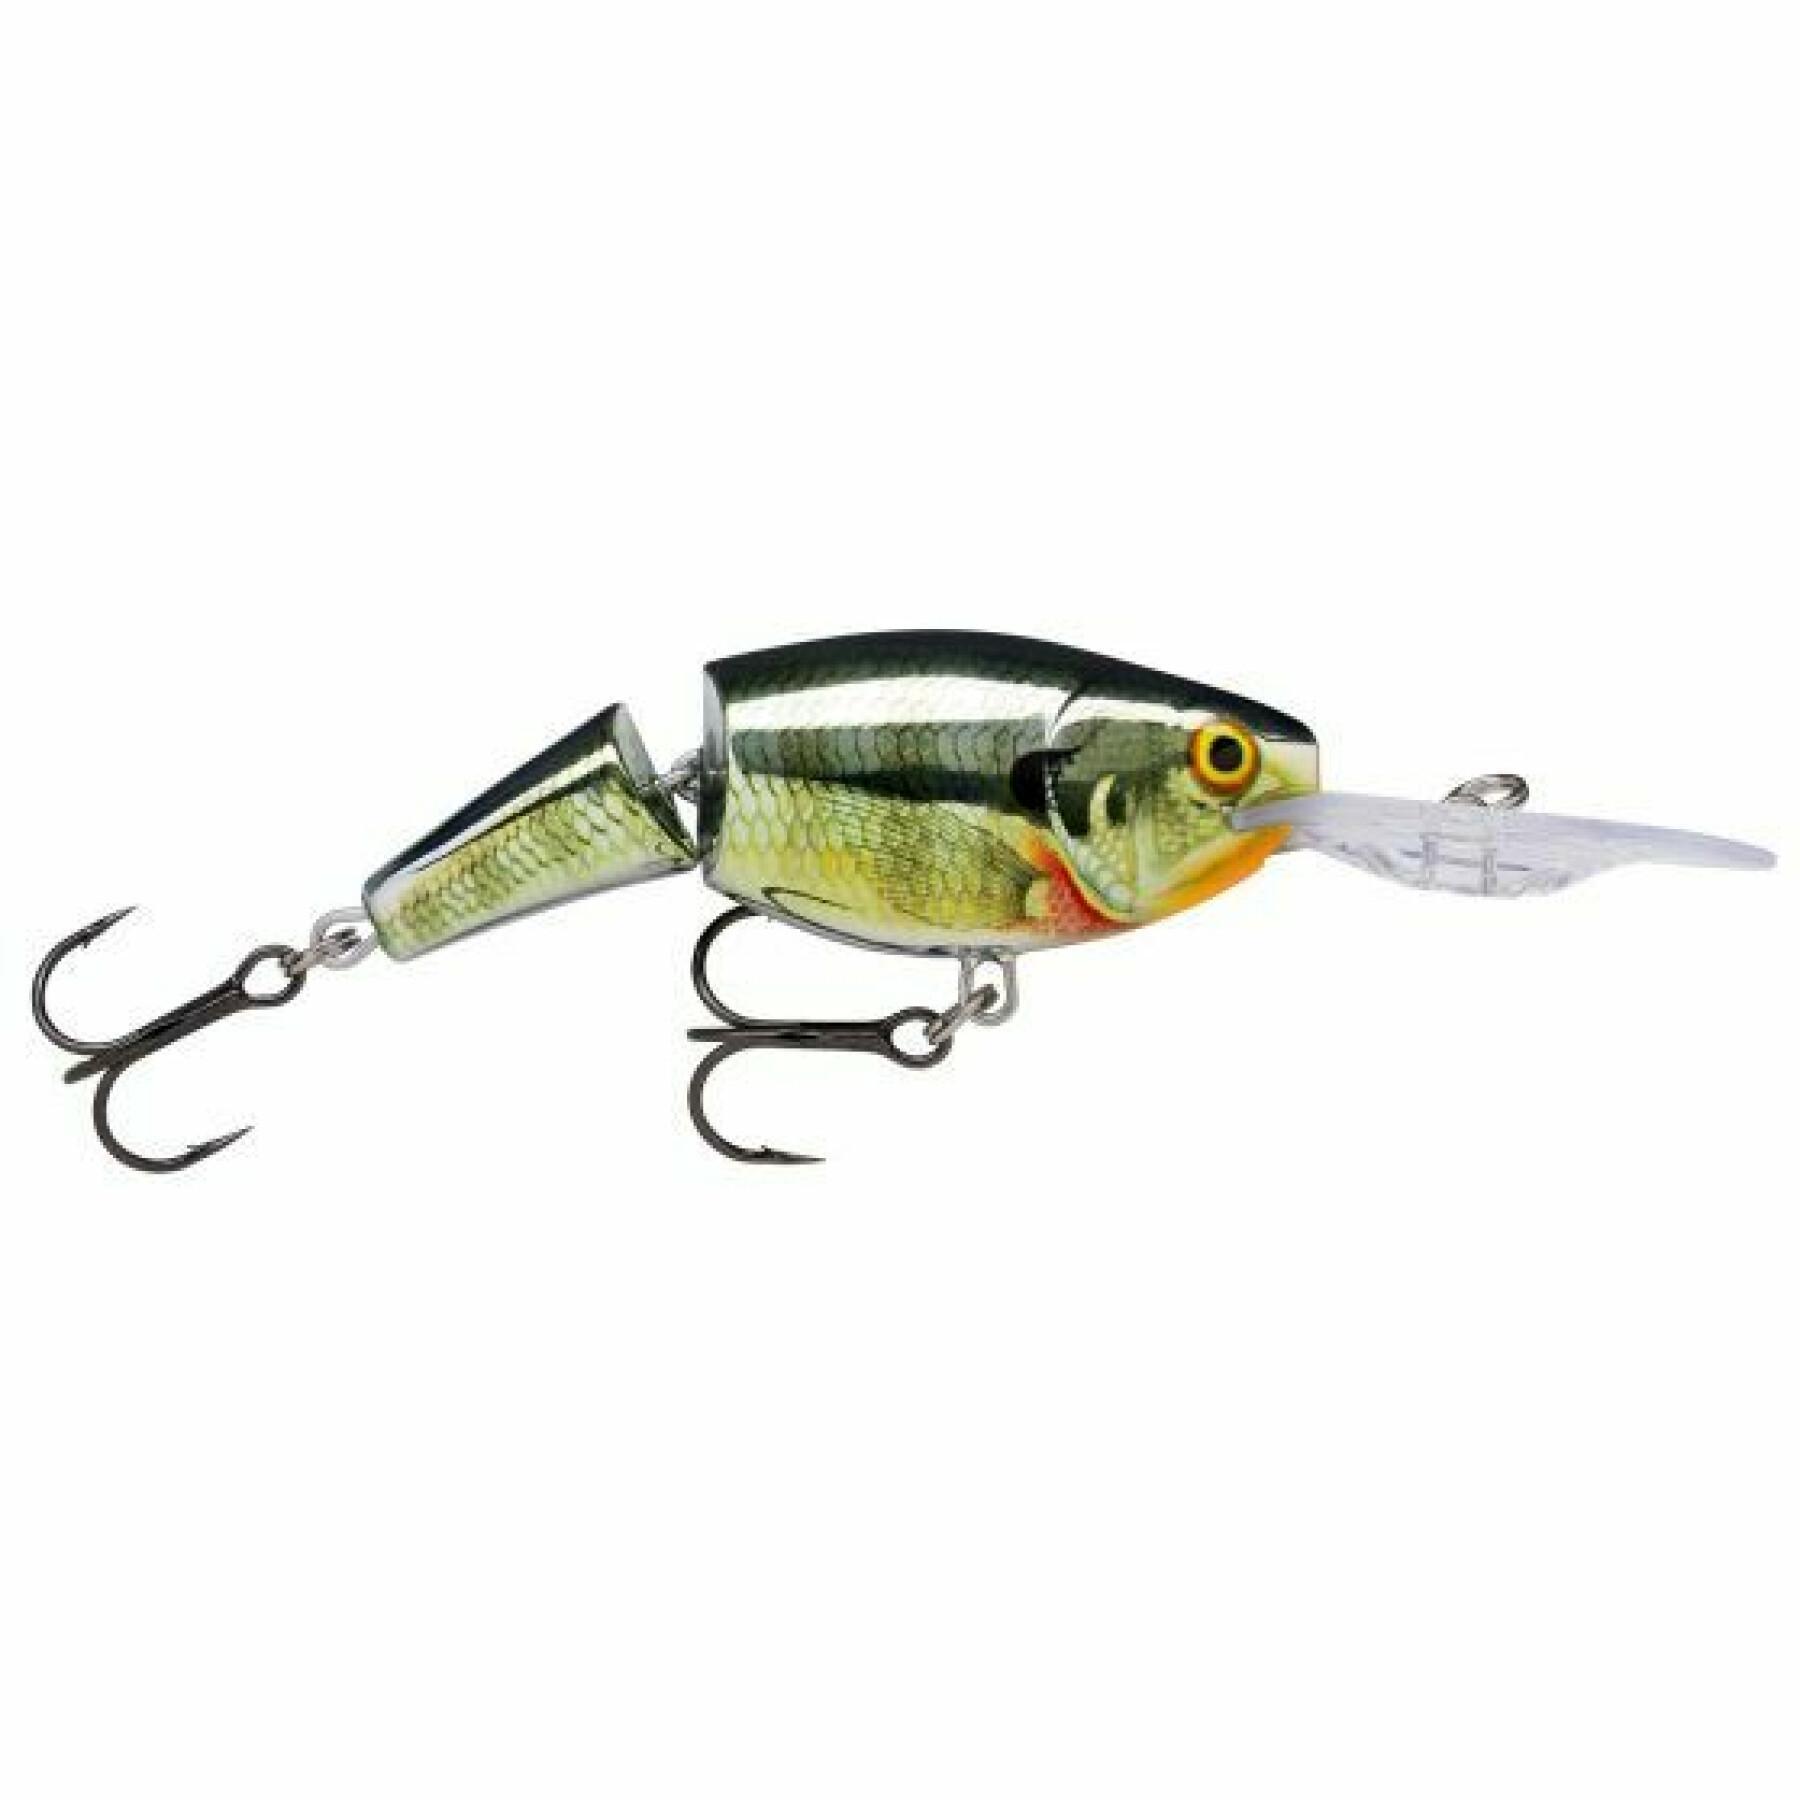 Suspending lure Rapala jointed shad rap 25g